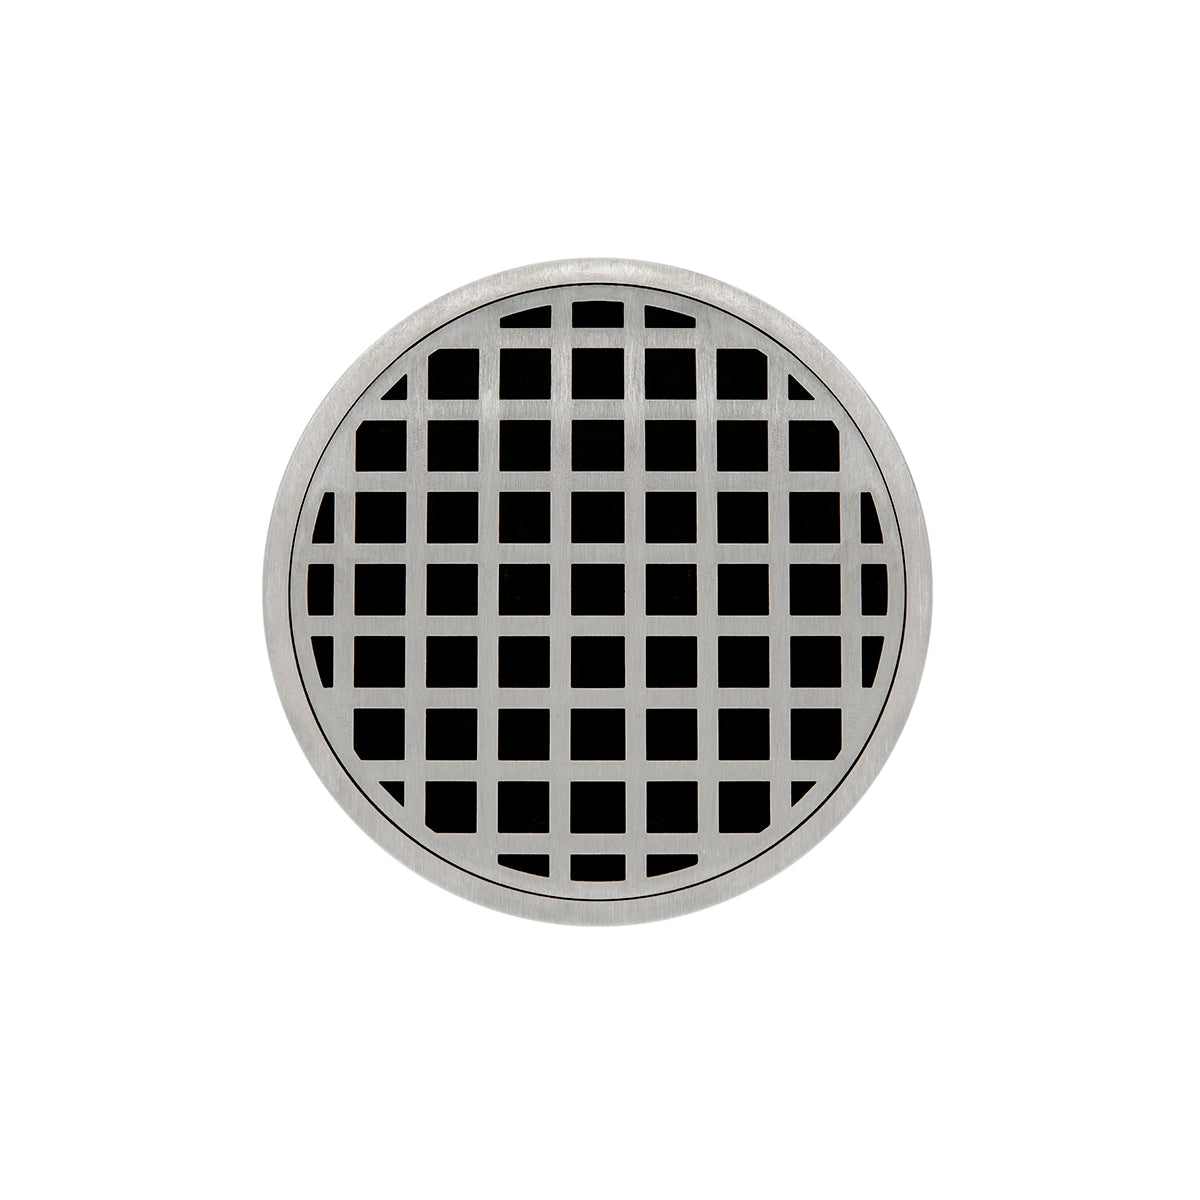 Infinity Drain 5" Round Strainer Premium Center Drain Kit with Squares Pattern Decorative Plate and 2" Throat for RQD 5